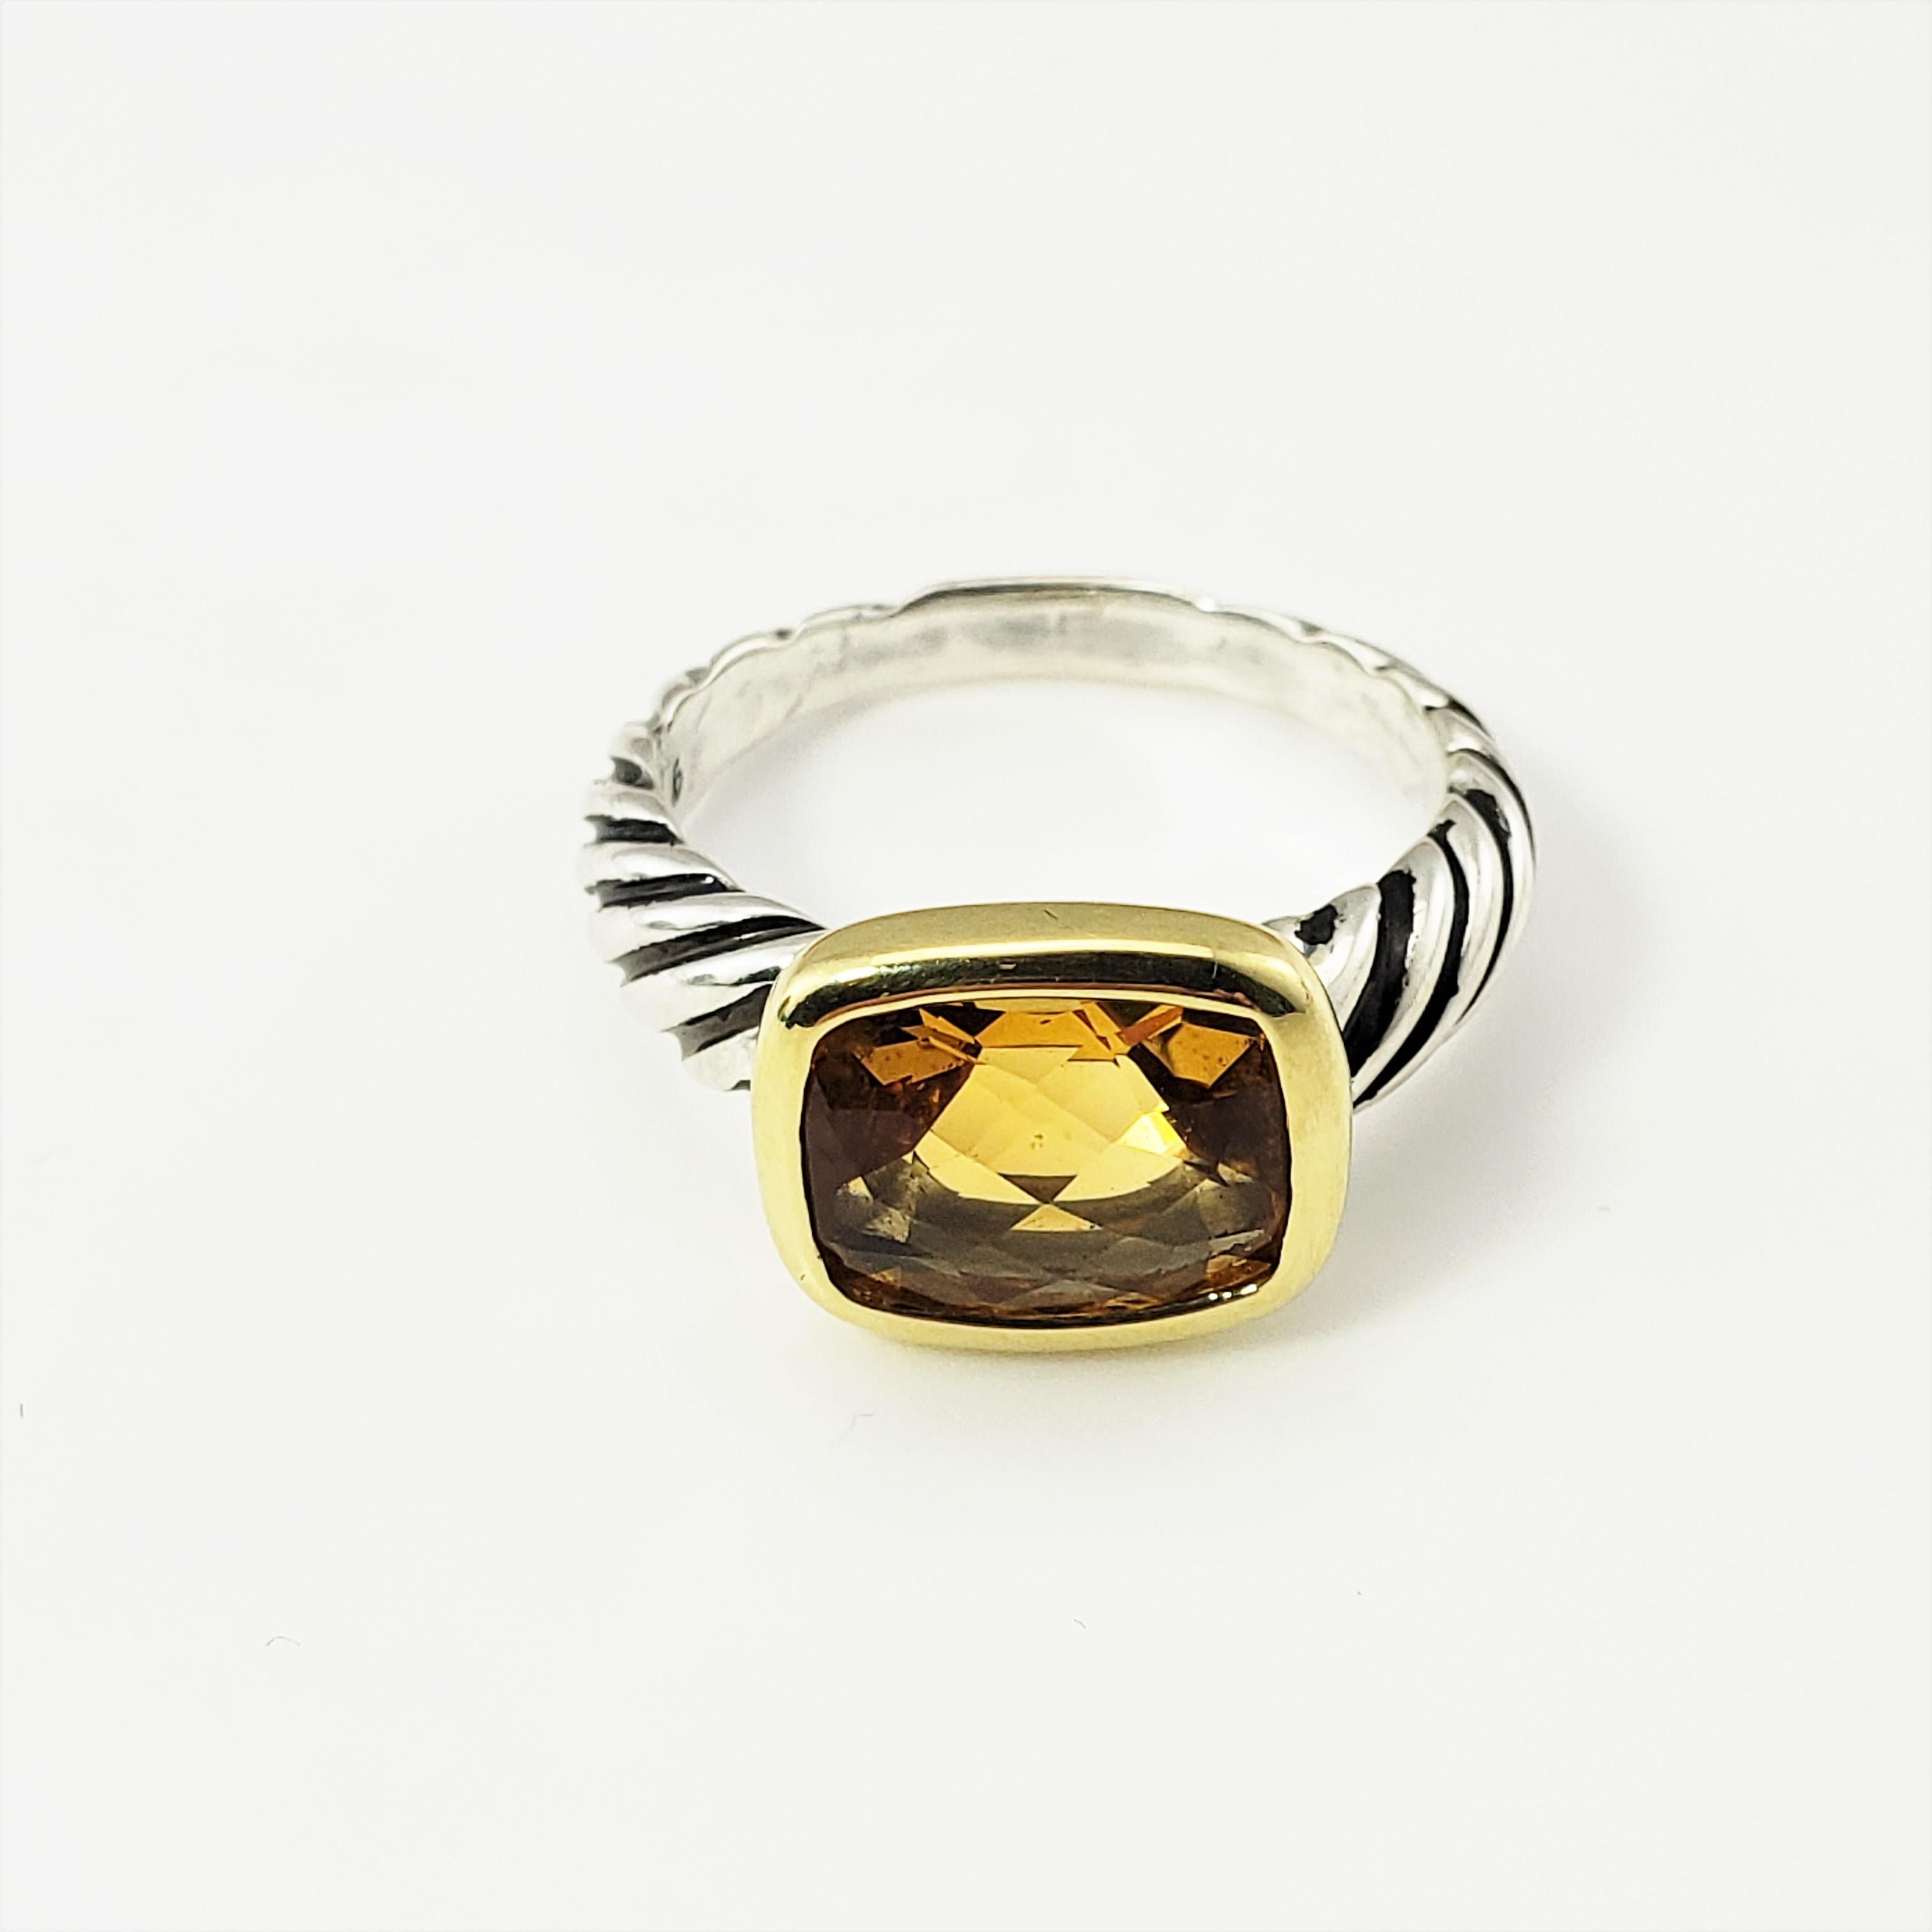 David Yurman Sterling Silver and 18 Karat Yellow Gold Citrine Ring Size 6.5-

This lovely ring features one rectangular citrine (12 mm x 10 mm) set in sterling silver and 18K yellow gold.  Shank measures 2 mm.

Ring Size: 6.5

Weight:  3.2 dwt. / 